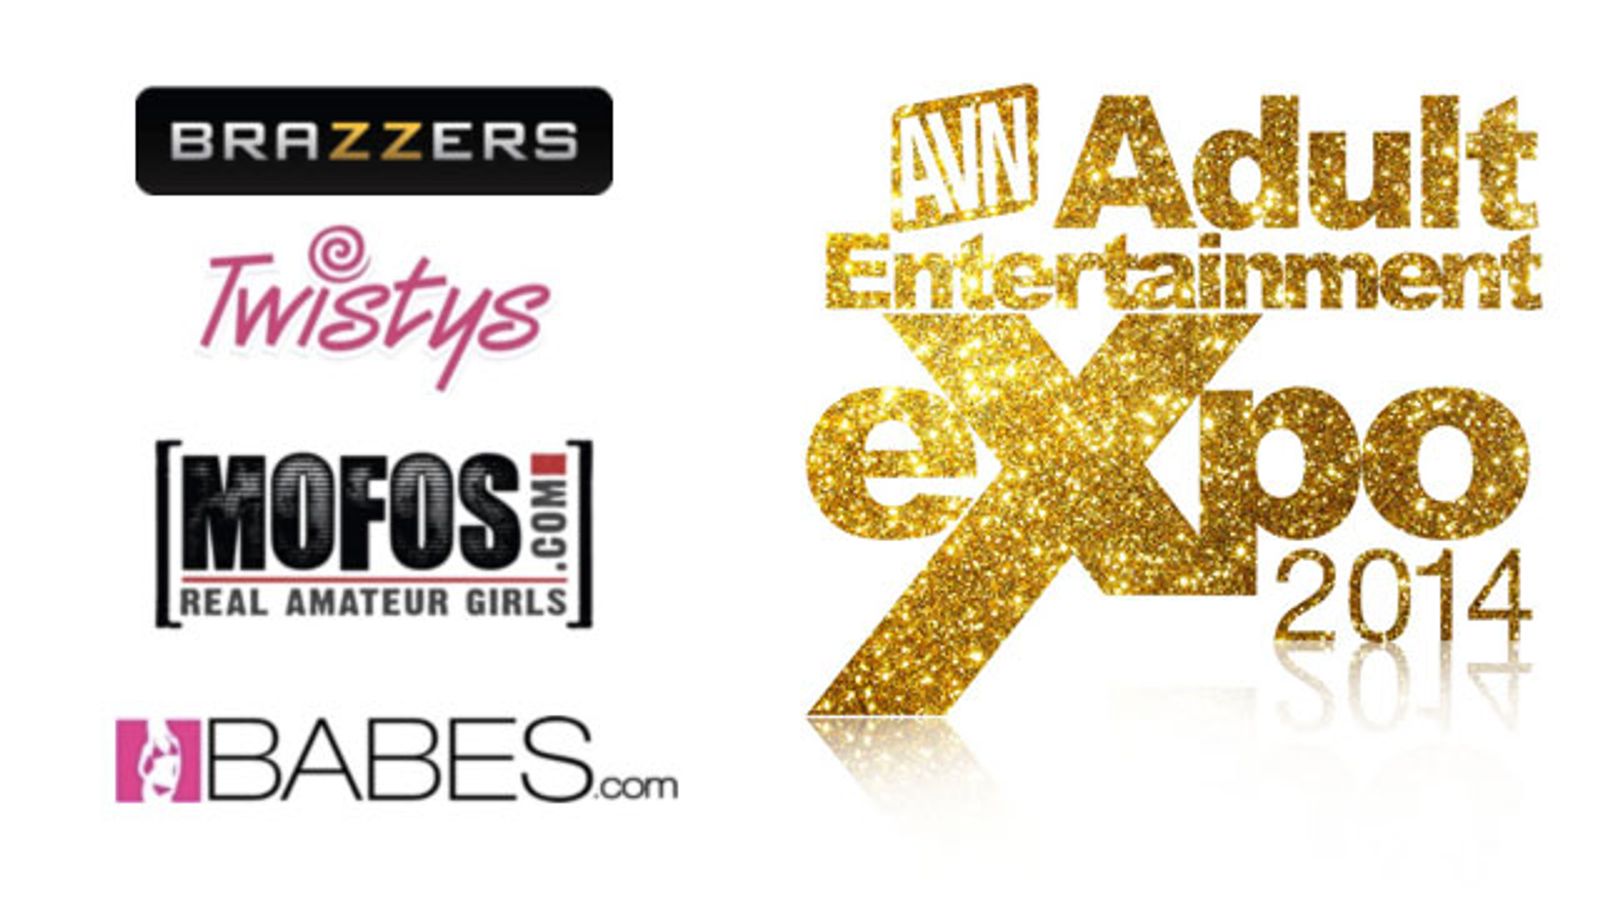 Brazzers, Babes.com, Twistys and Mofos Announce Schedule for Stars Signing at AEE